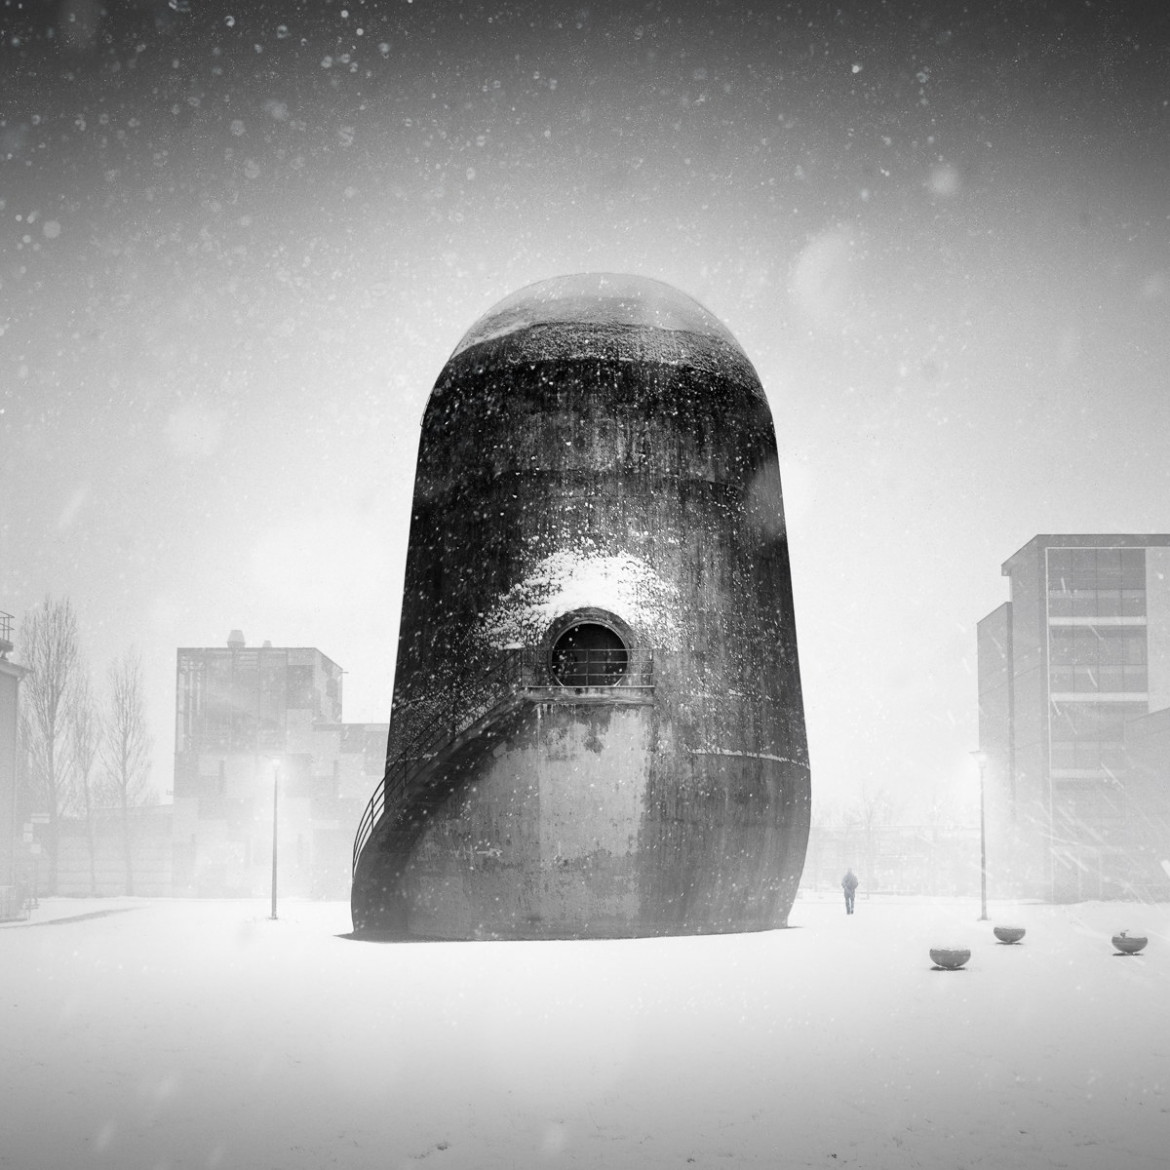 fot. Andreas Pohl "The Man and the Mysterious Tower", Niemcy.

1. miejsce w kategorii Architektura